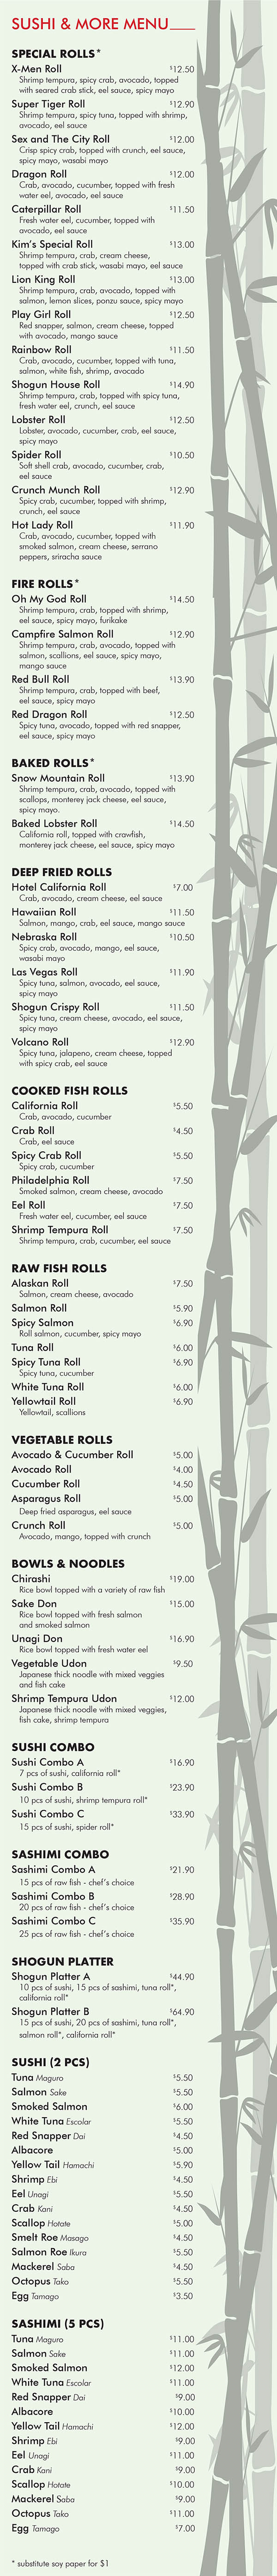 Shogun 
SUSHI & MORE MENU

SPECIAL ROLLS* 
X-Men Roll 		$12.50 
	Shrimp tempura, spicy crab, avocado, topped 
	with seared crab stick, eel sauce, spicy mayo
Super Tiger Roll 		$12.90 
	Shrimp tempura, spicy tuna, topped with shrimp,
	avocado, eel sauce 
Sex and The City Roll 		$12.00 
	Crisp spicy crab, topped with crunch, eel sauce,
 	spicy mayo, wasabi mayo 
Dragon Roll 		$12.00 
	Crab, avocado, cucumber, topped with fresh
	water eel, avocado, eel sauce 
Caterpillar Roll 		$11.50 
	Fresh water eel, cucumber, topped with 
	avocado, eel sauce 
Kim’s Special Roll 		$13.00
	Shrimp tempura, crab, cream cheese, 
	topped with crab stick, wasabi mayo, eel sauce 
Lion King Roll 		$13.00
	Shrimp tempura, crab, avocado, topped with 
	salmon, lemon slices, ponzu sauce, spicy mayo 
Play Girl Roll 		$12.50 
	Red snapper, salmon, cream cheese, topped 
	with avocado, mango sauce 
Rainbow Roll 		$11.50 
	Crab, avocado, cucumber, topped with tuna,
	salmon, white fish, shrimp, avocado 
Shogun House Roll 		$14.90 
	Shrimp tempura, crab, topped with spicy tuna,
	fresh water eel, crunch, eel sauce 
Lobster Roll 		$12.50 
	Lobster, avocado, cucumber, crab, eel sauce,
	spicy mayo 
Spider Roll 		$10.50 
	Soft shell crab, avocado, cucumber, crab, 
	eel sauce 
Crunch Munch Roll 		$12.90 
	Spicy crab, cucumber, topped with shrimp, 
	crunch, eel sauce 
Hot Lady Roll 		$11.90 
	Crab, avocado, cucumber, topped with 
	smoked salmon, cream cheese, serrano 
	peppers, sriracha sauce

FIRE ROLLS* 
Oh My God Roll 		$14.50 
	Shrimp tempura, crab, topped with shrimp, 
	eel sauce, spicy mayo, furikake 
Campfire Salmon Roll 		$12.90 
	Shrimp tempura, crab, avocado, topped with
	salmon, scallions, eel sauce, spicy mayo, 
	mango sauce 
Red Bull Roll 		$13.90 
	Shrimp tempura, crab, topped with beef, 
	eel sauce, spicy mayo 
Red Dragon Roll 		$12.50 
	Spicy tuna, avocado, topped with red snapper, 
	eel sauce, spicy mayo 

BAKED ROLLS* 
Snow Mountain Roll 		$13.90 
	Shrimp tempura, crab, avocado, topped with 
	scallops, monterey jack cheese, eel sauce, 
	spicy mayo.
Baked Lobster Roll 		$14.50 
	California roll, topped with crawfish, 
	monterey jack cheese, eel sauce, spicy mayo 

DEEP FRIED ROLLS
Hotel California Roll 			$7.00 
	Crab, avocado, cream cheese, eel sauce 
Hawaiian Roll 		$11.50 
	Salmon, mango, crab, eel sauce, mango sauce 
Nebraska Roll 		$10.50 
	Spicy crab, avocado, mango, eel sauce, 
	wasabi mayo 
Las Vegas Roll 		$11.90 
	Spicy tuna, salmon, avocado, eel sauce, 
	spicy mayo 
Shogun Crispy Roll 		$11.50 
	Spicy tuna, cream cheese, avocado, eel sauce,
	spicy mayo 
Volcano Roll 		$12.90 
	Spicy tuna, jalapeno, cream cheese, topped 
	with spicy crab, eel sauce 

COOKED FISH ROLLS 
California Roll 			$5.50
	Crab, avocado, cucumber 
Crab Roll 			$4.50
	Crab, eel sauce 
Spicy Crab Roll 			$5.50
	Spicy crab, cucumber 
Philadelphia Roll 			$7.50
	Smoked salmon, cream cheese, avocado 
Eel Roll 			$7.50
	Fresh water eel, cucumber, eel sauce 
Shrimp Tempura Roll 			$7.50
	Shrimp tempura, crab, cucumber, eel sauce 

RAW FISH ROLLS 
Alaskan Roll 			$7.50
	Salmon, cream cheese, avocado 
Salmon Roll 			$5.90 
Spicy Salmon 			$6.90
	Roll salmon, cucumber, spicy mayo 
Tuna Roll 			$6.00 
Spicy Tuna Roll 			$6.90
	Spicy tuna, cucumber
White Tuna Roll 			$6.00 
Yellowtail Roll 			$6.90
	Yellowtail, scallions 

VEGETABLE ROLLS 
Avocado & Cucumber Roll  			$5.00 
Avocado Roll  			$4.00 
Cucumber Roll 			$4.50 
Asparagus Roll 			$5.00
	Deep fried asparagus, eel sauce 
Crunch Roll 			$5.00 
	Avocado, mango, topped with crunch

BOWLS & NOODLES
Chirashi 		$19.00 
	Rice bowl topped with a variety of raw fish 
Sake Don 		$15.00 
	Rice bowl topped with fresh salmon 
	and smoked salmon 
Unagi Don 		$16.90 
	Rice bowl topped with fresh water eel 
Vegetable Udon 			$9.50 
	Japanese thick noodle with mixed veggies 
	and fish cake 
Shrimp Tempura Udon 		$12.00 
	Japanese thick noodle with mixed veggies, 
	fish cake, shrimp tempura 

SUSHI COMBO 
Sushi Combo A 		$16.90
	7 pcs of sushi, california roll*  
Sushi Combo B 		$23.90
	10 pcs of sushi, shrimp tempura roll*  
Sushi Combo C 		$33.90
	15 pcs of sushi, spider roll* 

SASHIMI COMBO 
Sashimi Combo A 		$21.90
	15 pcs of raw fish - chef’s choice 	 
Sashimi Combo B 		$28.90
	20 pcs of raw fish - chef’s choice 
Sashimi Combo C 		$35.90
	25 pcs of raw fish - chef’s choice 

SHOGUN PLATTER 
Shogun Platter A 		$44.90 
	10 pcs of sushi, 15 pcs of sashimi, tuna roll*,
 	california roll* 
Shogun Platter B 		$64.90 
	15 pcs of sushi, 20 pcs of sashimi, tuna roll*,
	salmon roll*, california roll* 

SUSHI (2 PCS) 
Tuna Maguro 			$5.50 
Salmon Sake 			$5.50 
Smoked Salmon 			$6.00 
White Tuna Escolar 			$5.50 
Red Snapper Dai 			$4.50 
Albacore 			$5.00
Yellow Tail Hamachi 			$5.90 
Shrimp Ebi 			$4.50 
Eel Unagi 			$5.50 
Crab Kani 			$4.50 
Scallop Hotate 			$5.00 
Smelt Roe Masago 			$4.50 
Salmon Roe Ikura 			$5.50 
Mackerel Saba 			$4.50 
Octopus Tako 			$5.50
Egg Tamago 			$3.50 

SASHIMI (5 PCS) 
Tuna Maguro 		$11.00 
Salmon Sake 		$11.00 
Smoked Salmon 		$12.00 
White Tuna Escolar 		$11.00 
Red Snapper Dai 			 $9.00 
Albacore 		$10.00 
Yellow Tail Hamachi 		$12.00 
Shrimp Ebi 			 $9.00 
Eel Unagi 		$11.00 
Crab Kani 			 $9.00 
Scallop Hotate 		$10.00 
Mackerel Saba 			 $9.00 
Octopus Tako 		$11.00 
Egg Tamago 			 $7.00 


* substitute soy paper for $1